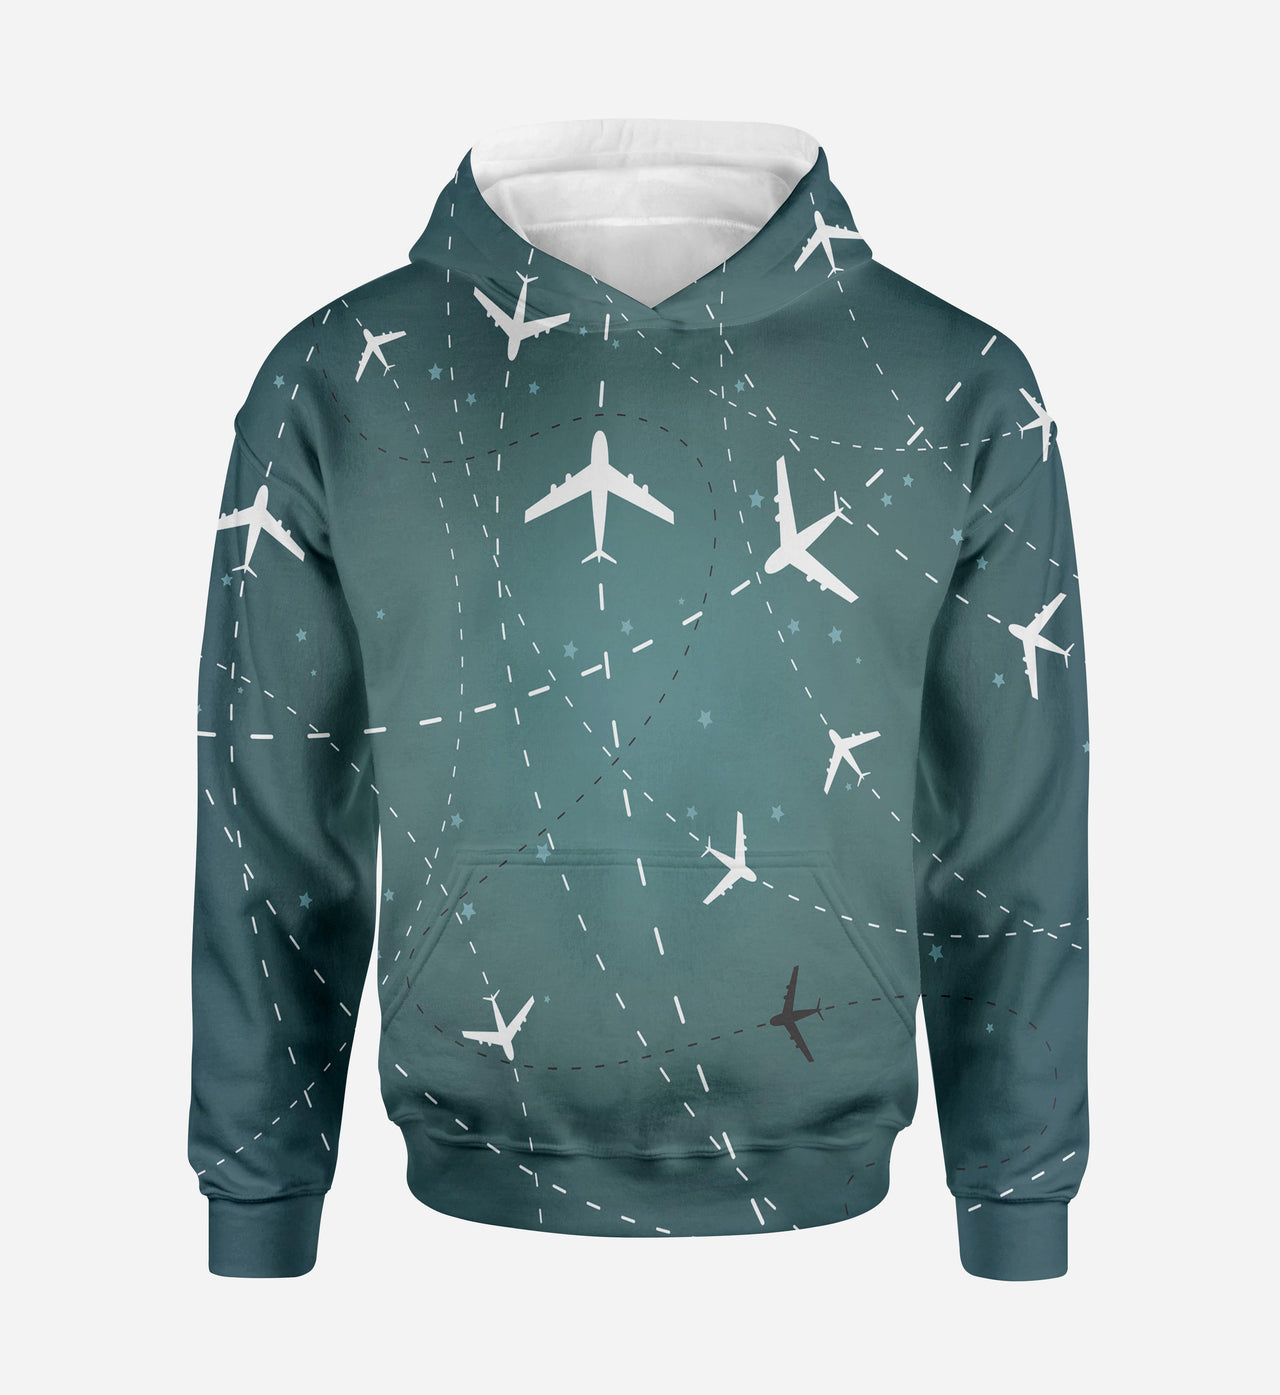 Travelling with Aircraft (Green) Printed 3D Hoodies